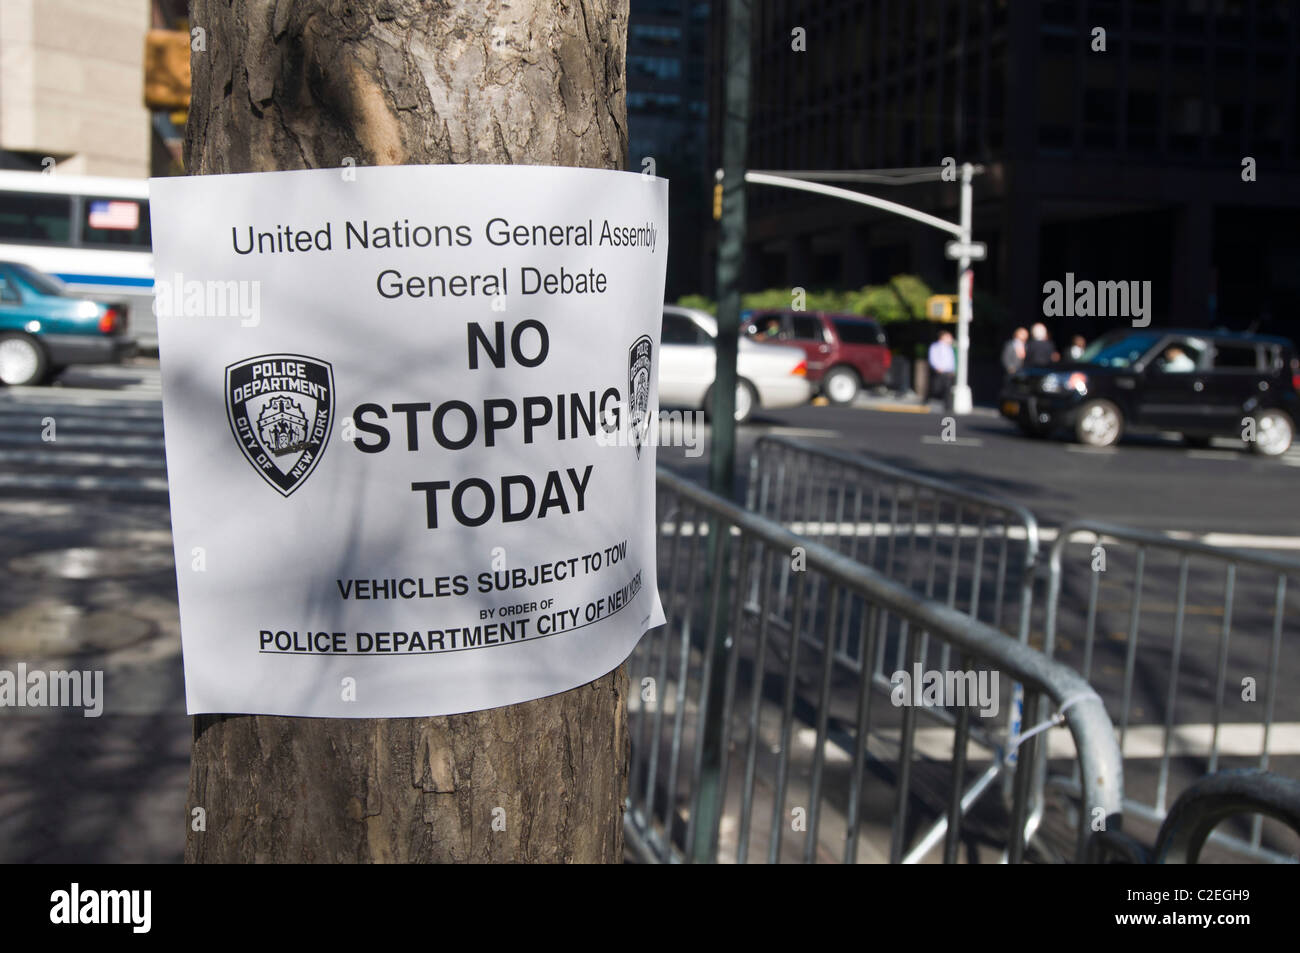 United Nations General Assembly, General Debate, No Stopping Today sign near UN headquarter, New York City, USA Stock Photo